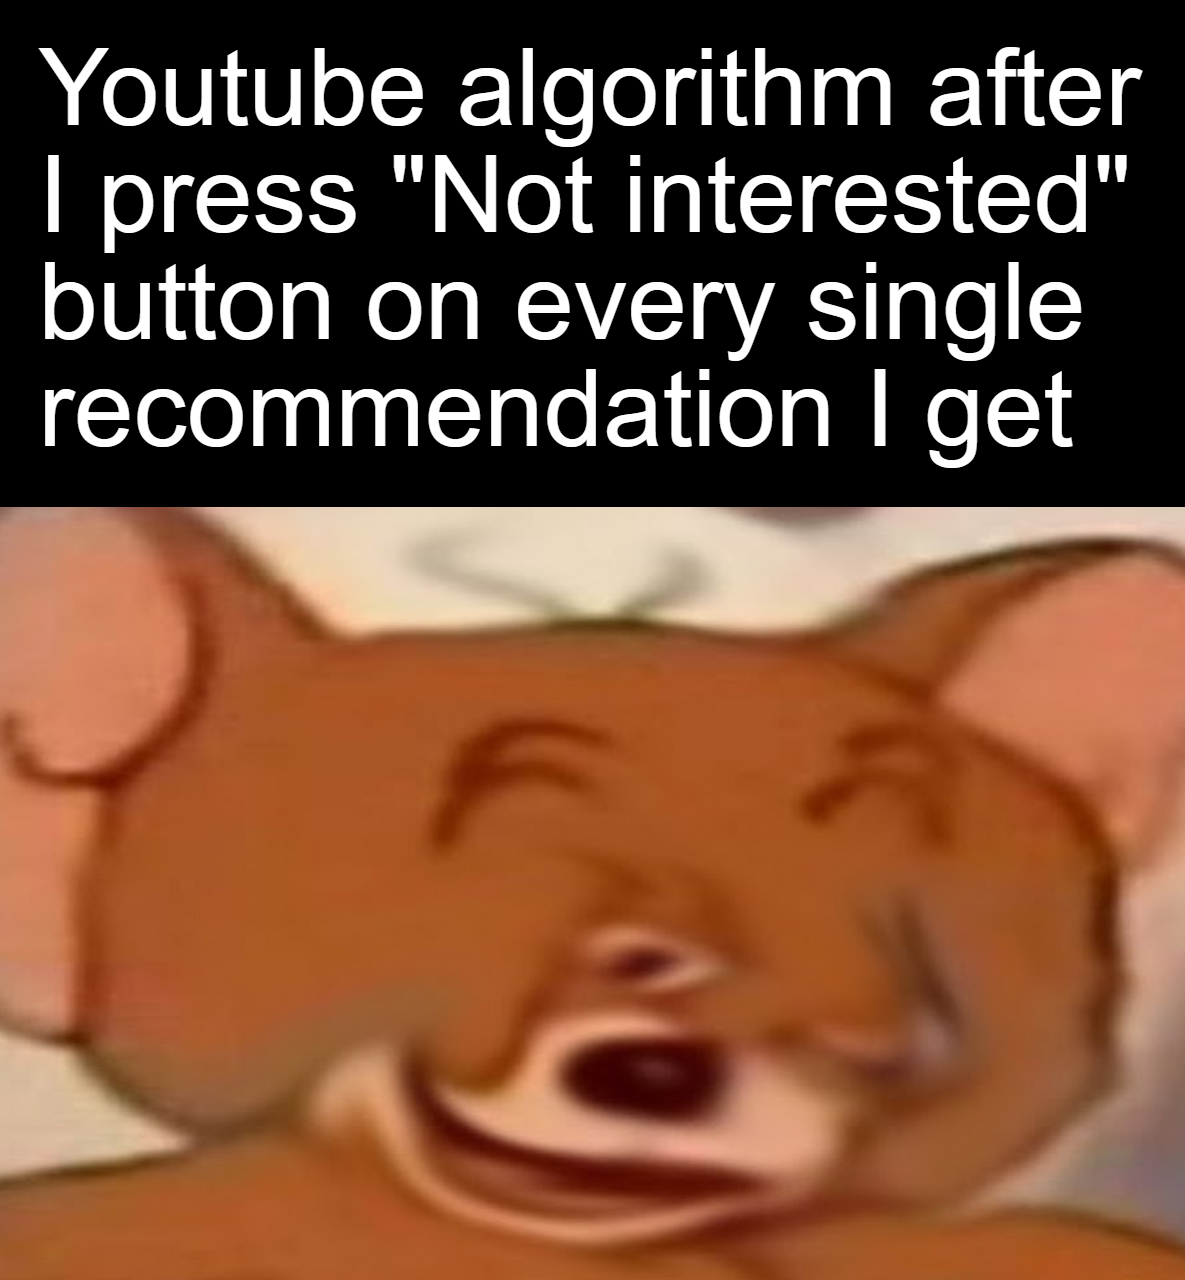 cartoon - Youtube algorithm after I press "Not interested" button on every single recommendation I get